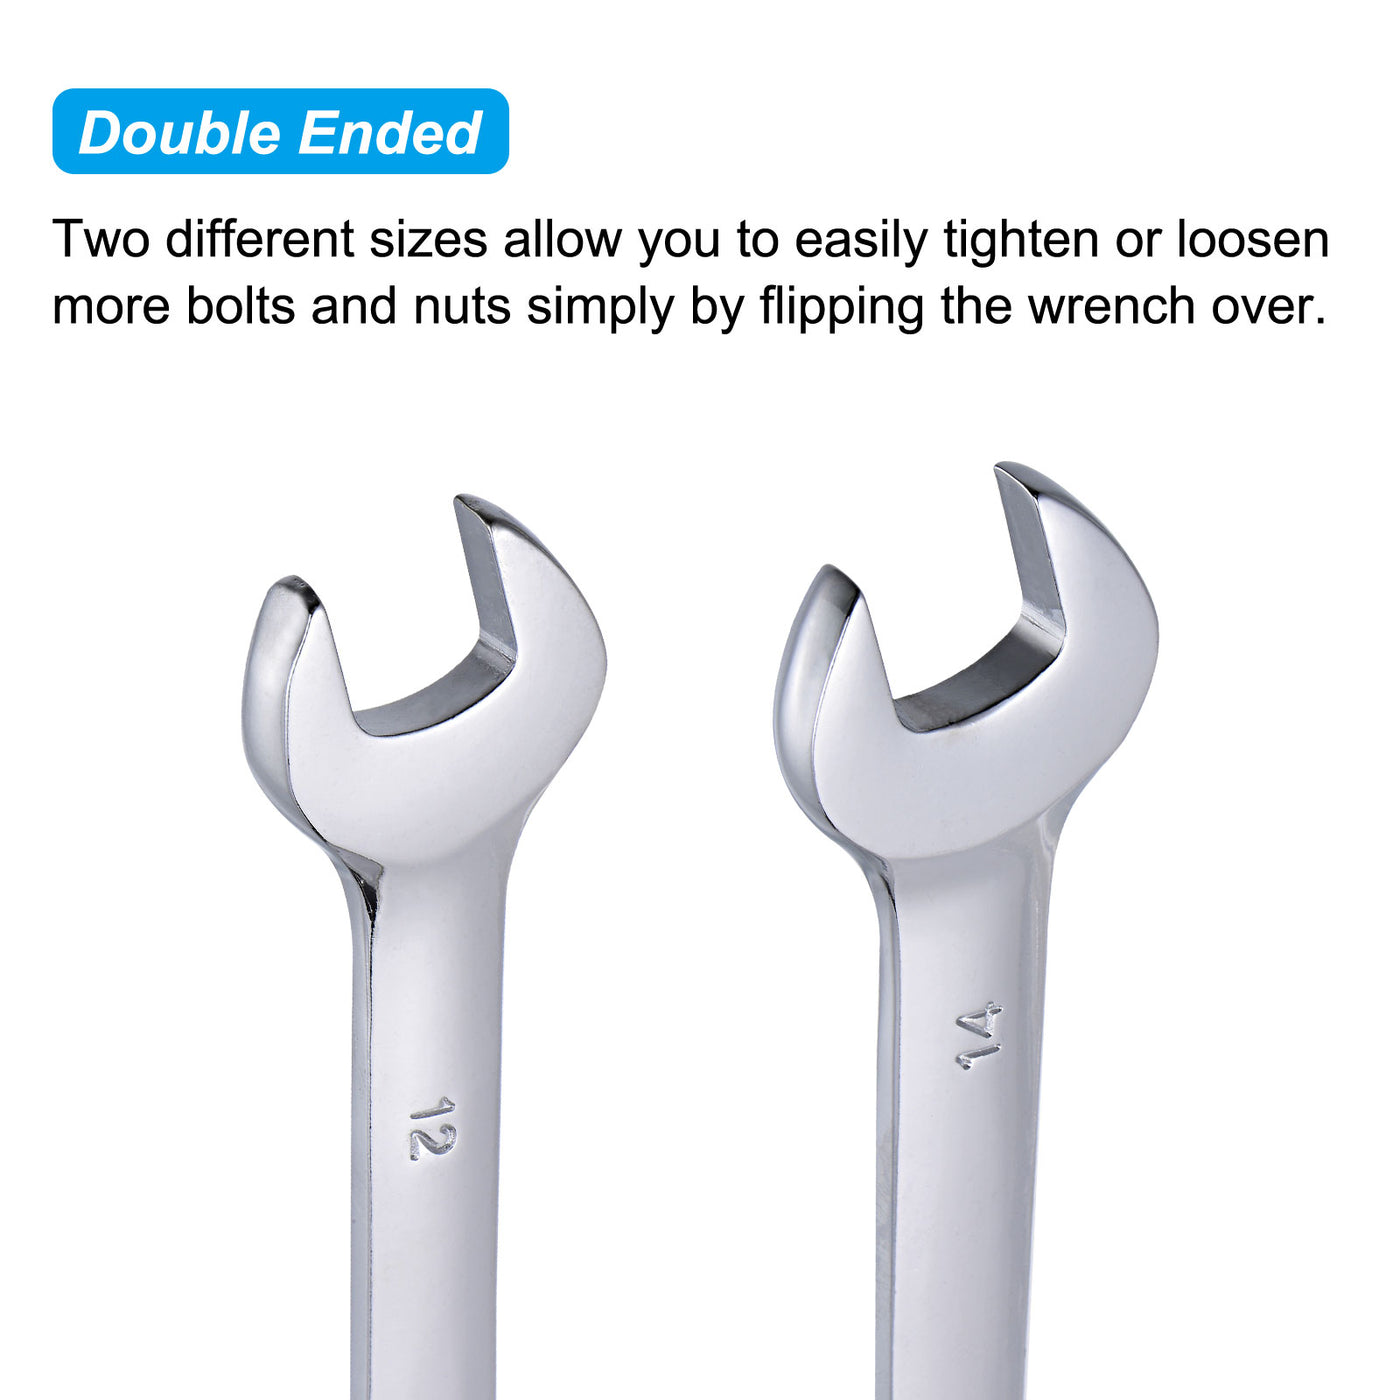 uxcell Uxcell Double Open-End Wrench Set, 5.5-14mm Metric CR-V with Rolling Pouch, 4-Piece